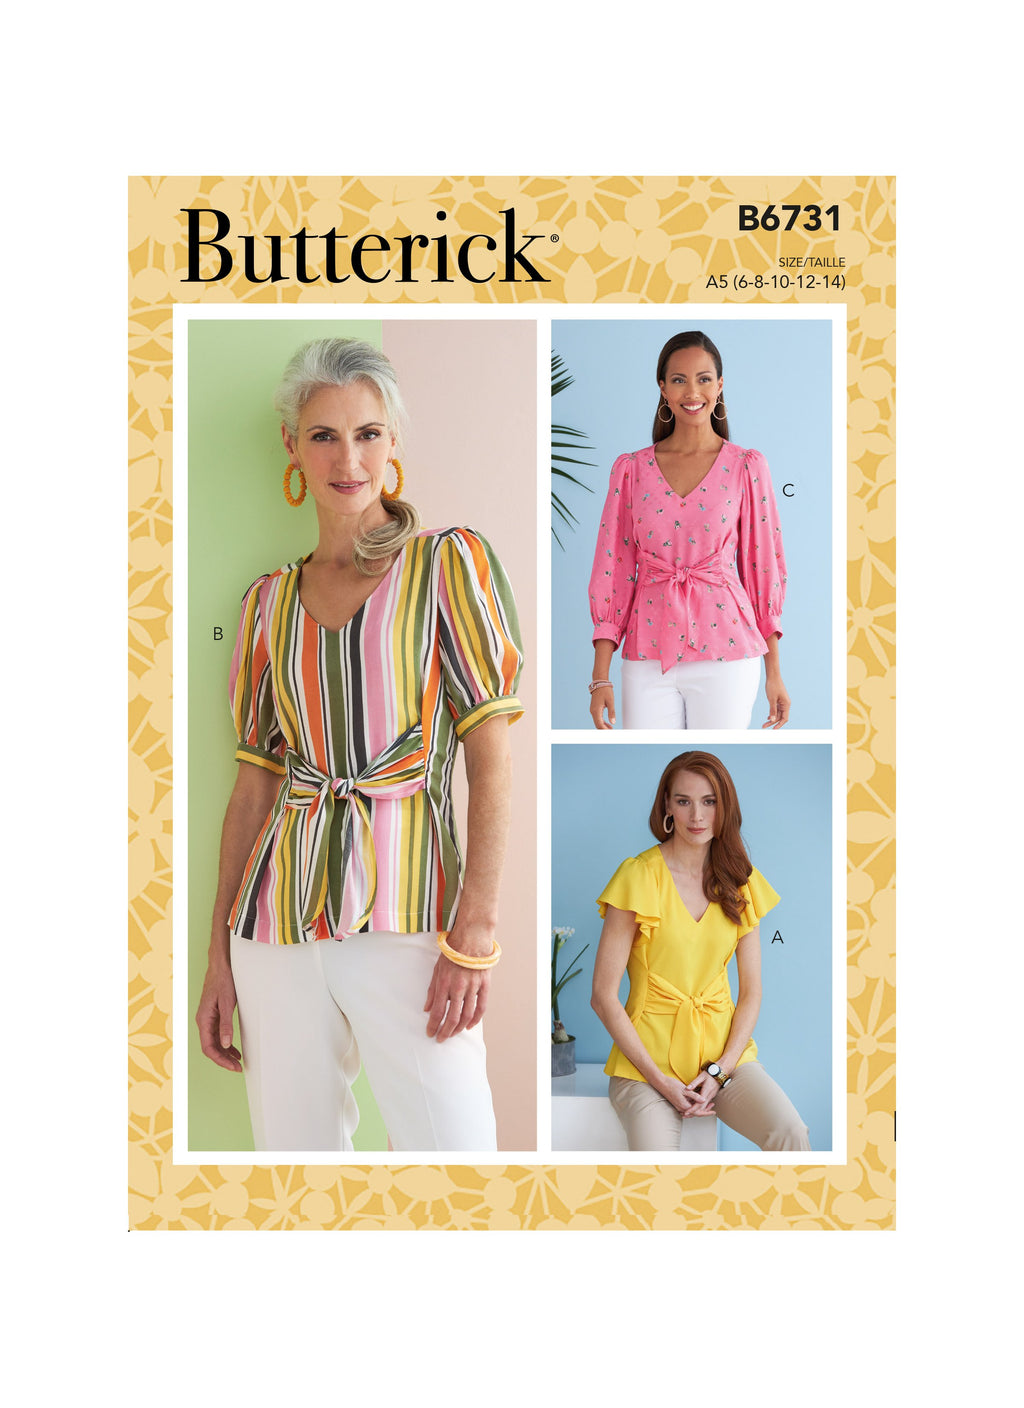 Butterick Sewing Pattern 6731 Misses' Top